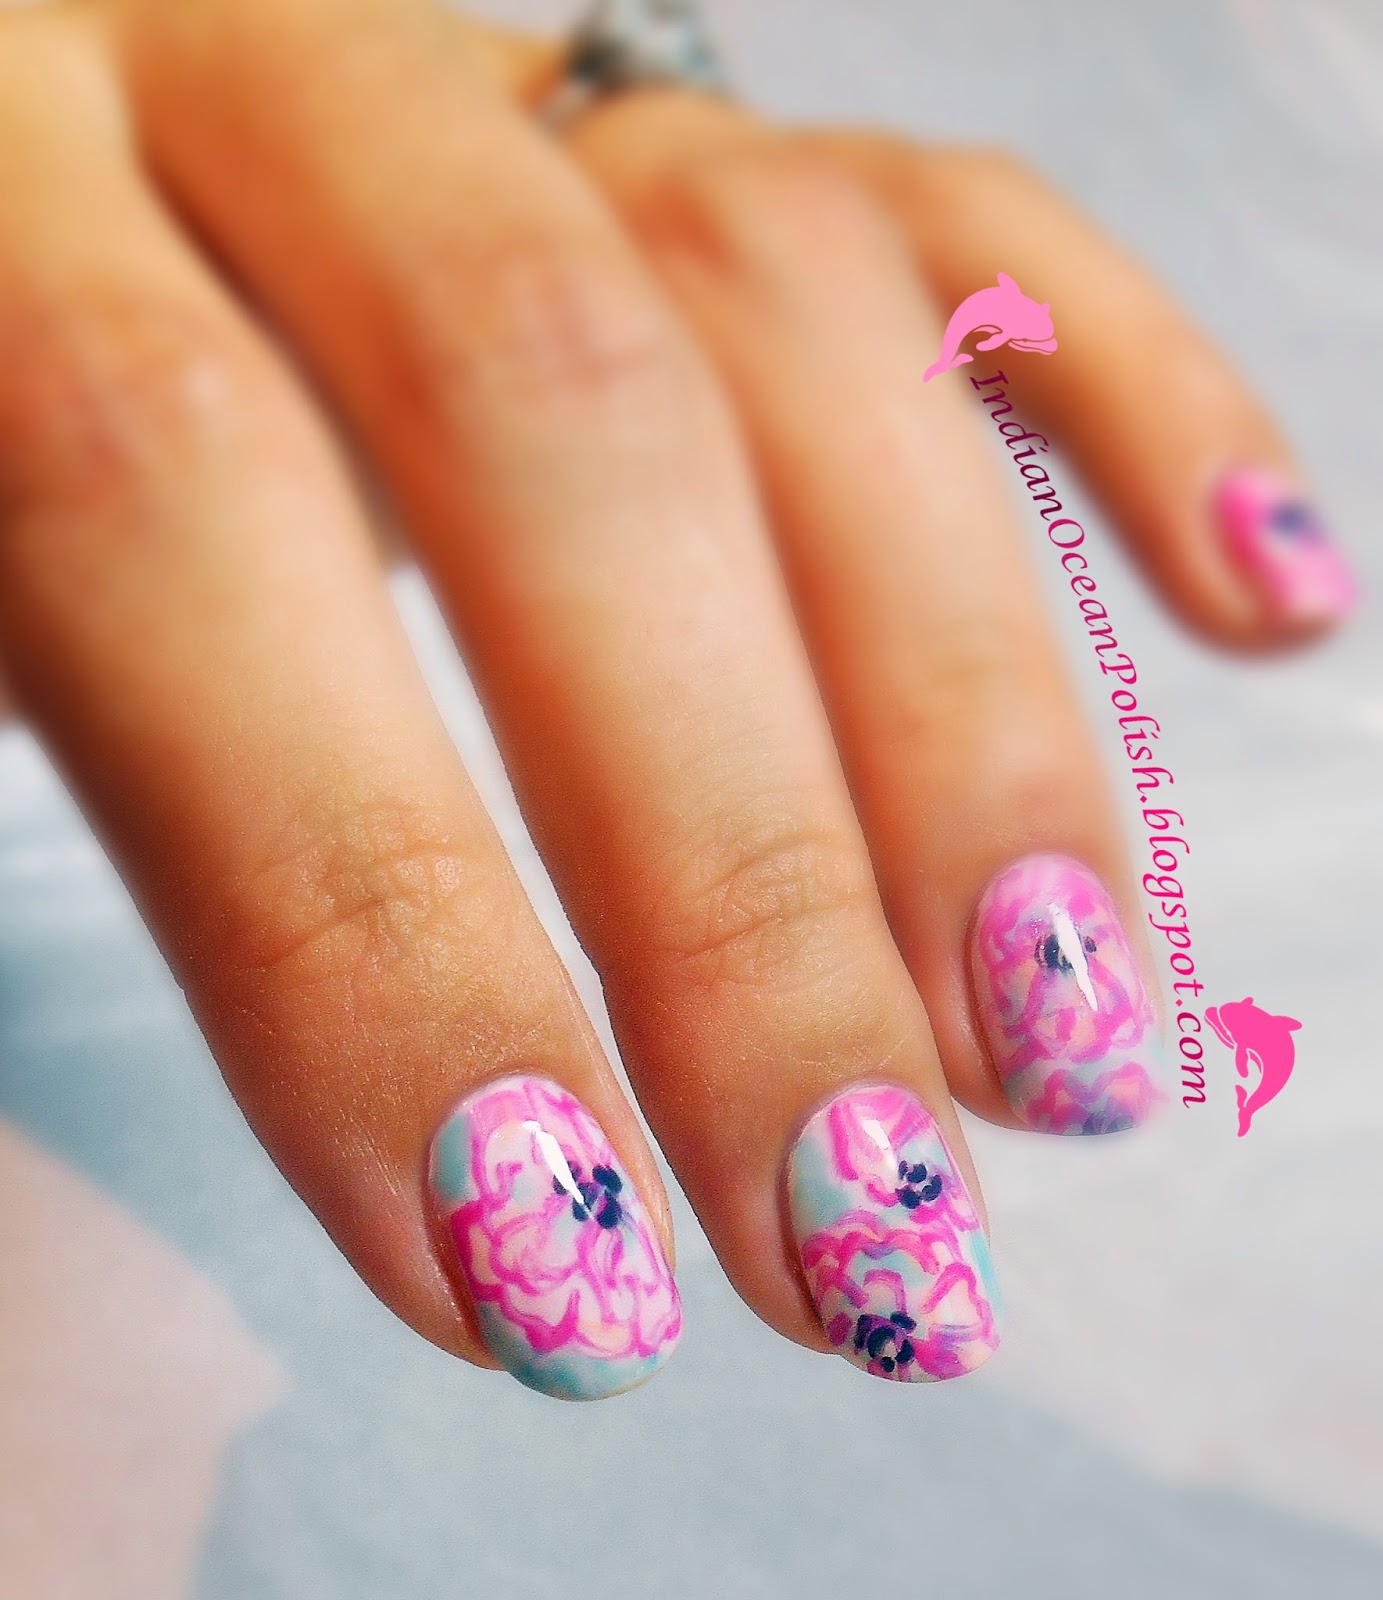 Indian Ocean Polish: Lilly Pulitzer Floral Nails